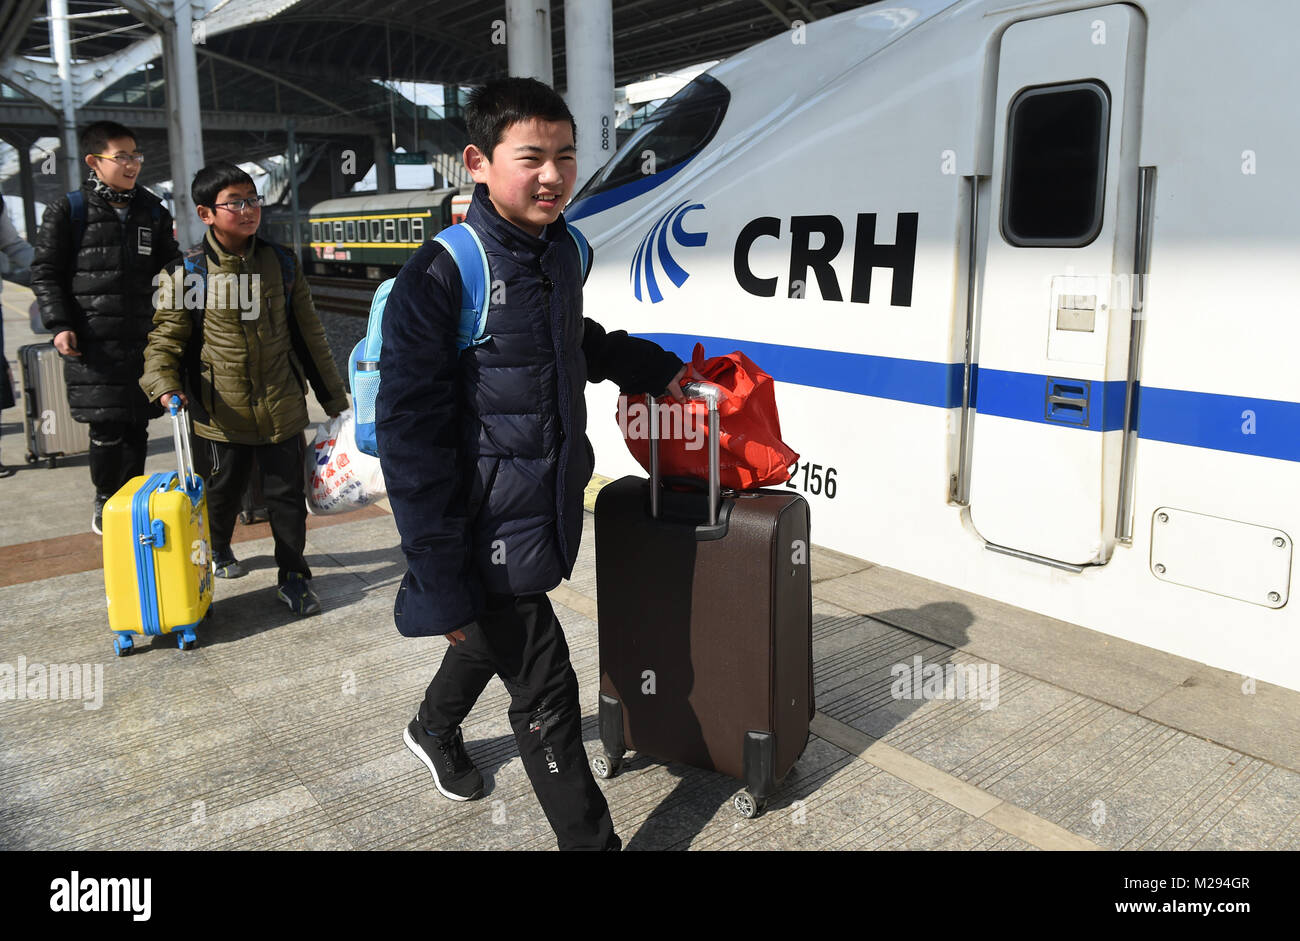 (180206) -- ON BOARD K419, Feb. 6, 2018 (Xinhua) -- Sun Jianjun (1st R) and his schoolmates walk on the platform of the railway station of Nantong, in east China's Jiangsu Province, Feb. 1, 2018. Spring Festival, or Chinese Lunar New Year, falls on Feb. 16 this year. Hundreds of millions of Chinese will return to their hometowns for family gatherings. 14-year-old Sun Jianjun and his 15 schoolmates are among these travellers eager back to home. On Feb. 1, the first day of the 2018 Spring Festival travel rush, they stepped onto a train in Nantong of east China's Jiangsu Province on a journe Stock Photo